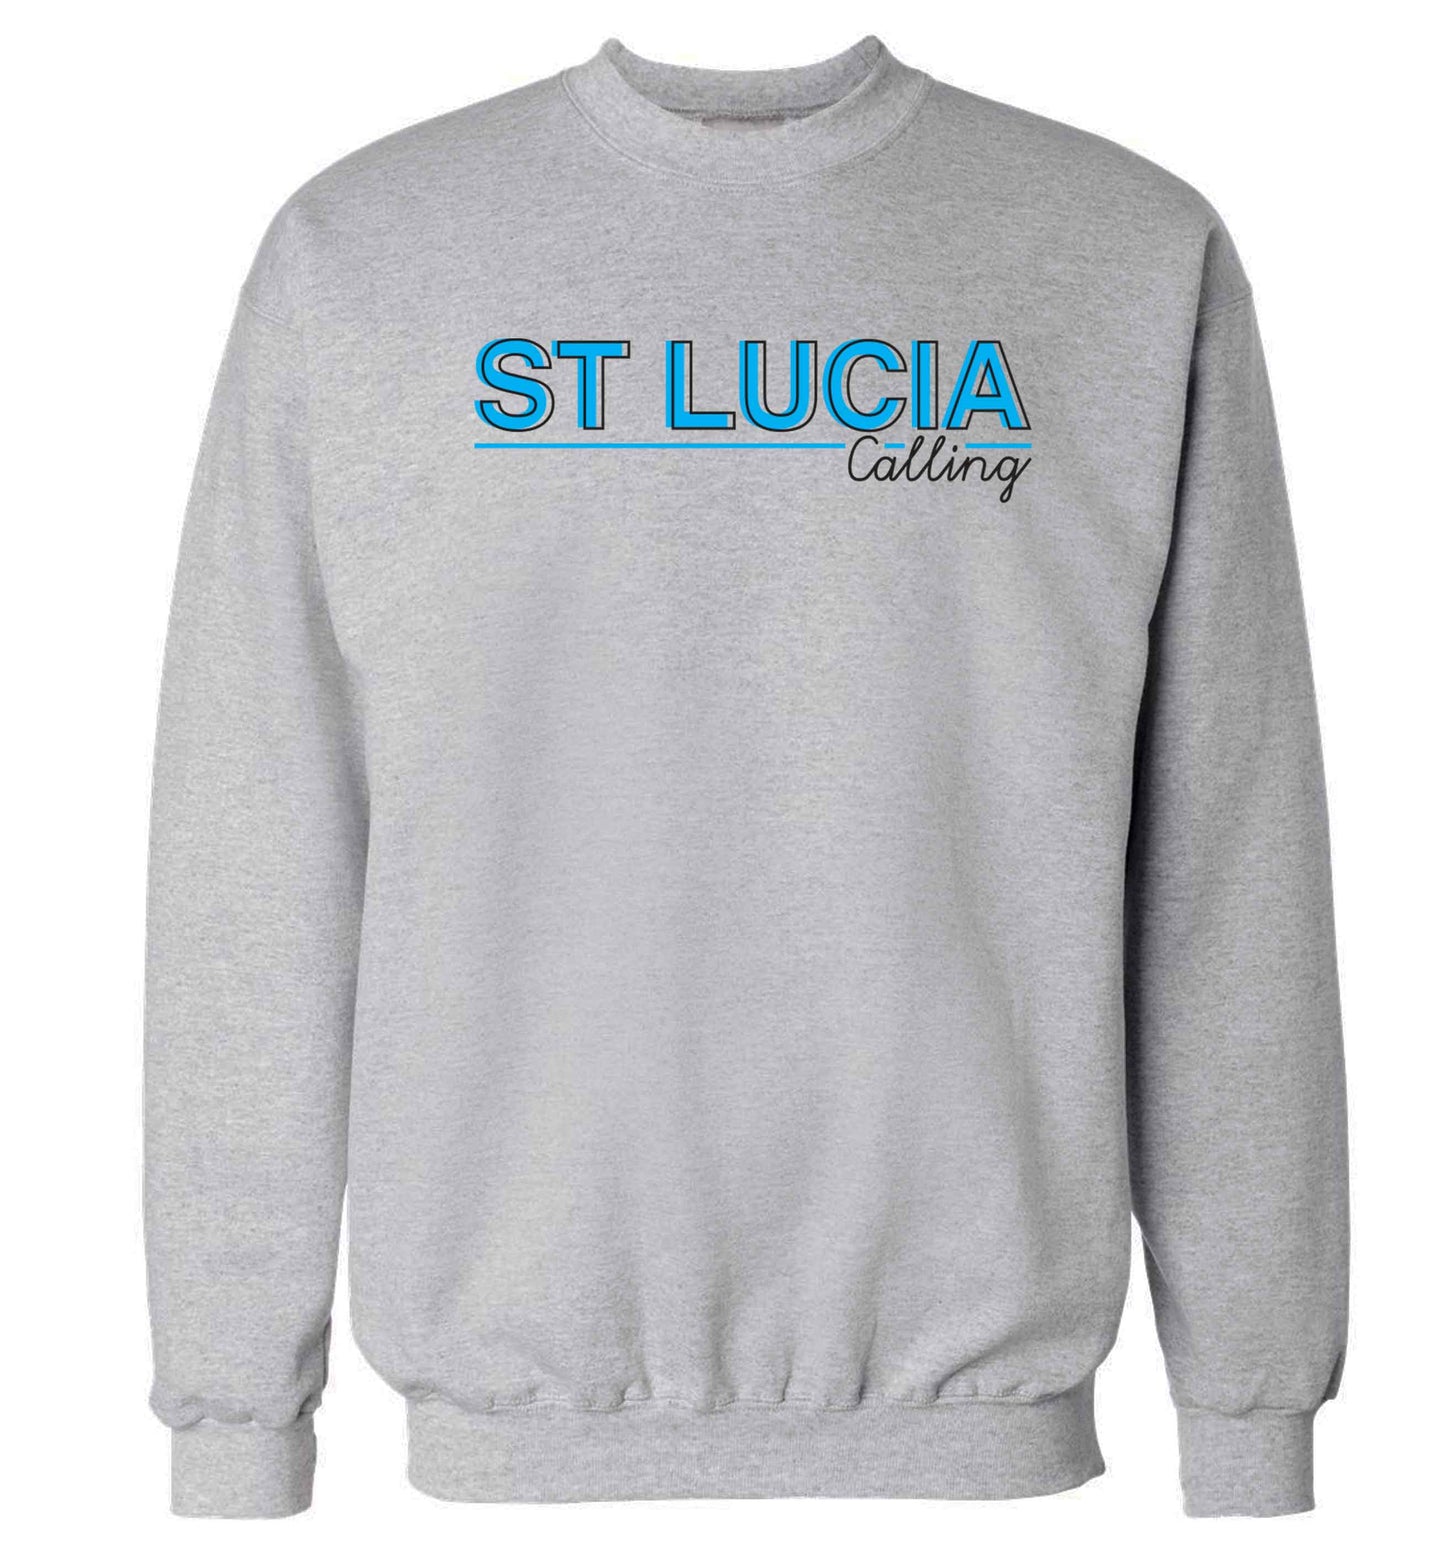 St Lucia calling Adult's unisex grey Sweater 2XL